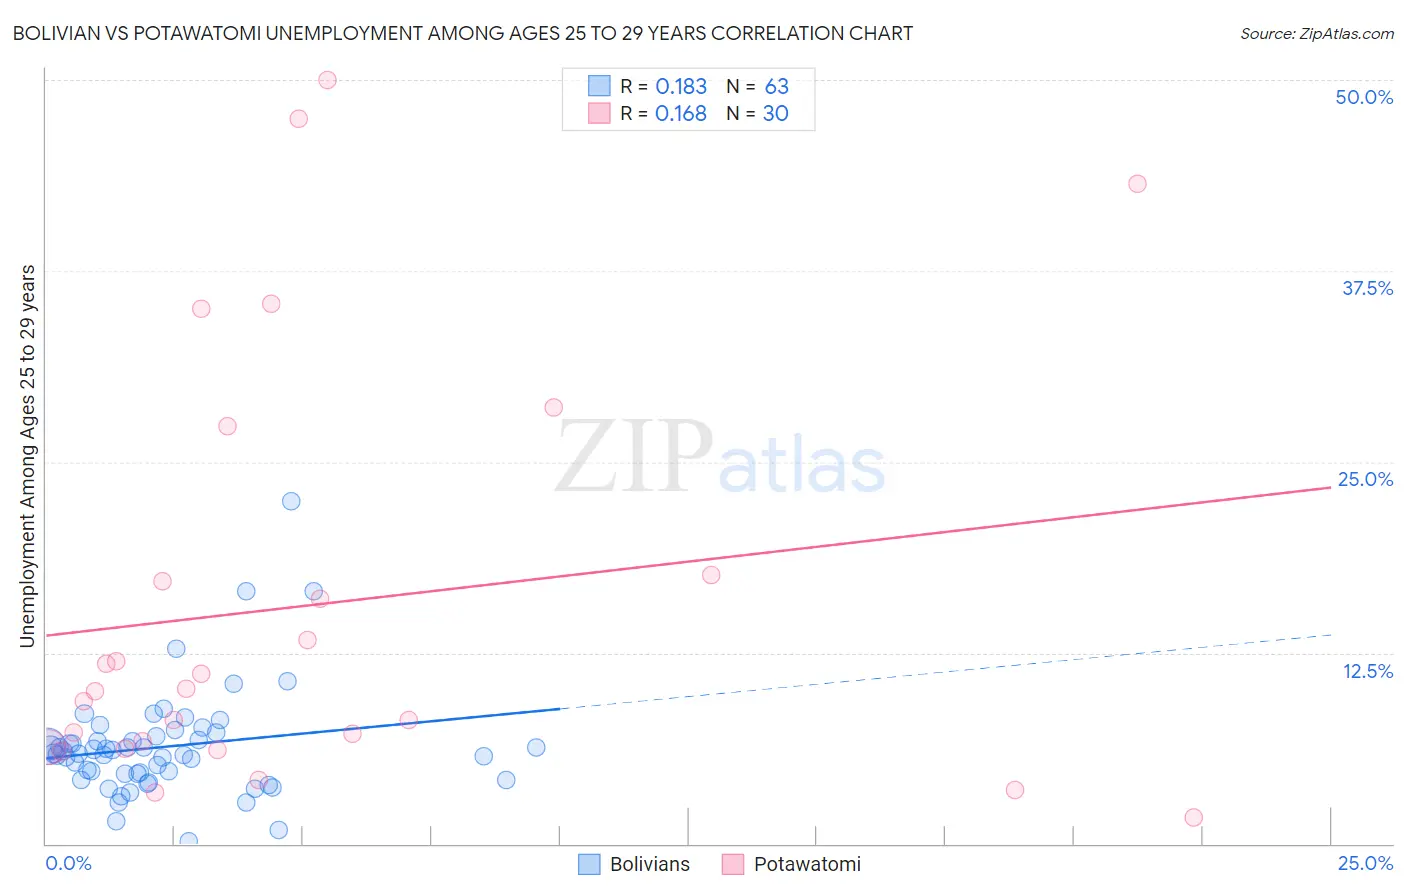 Bolivian vs Potawatomi Unemployment Among Ages 25 to 29 years